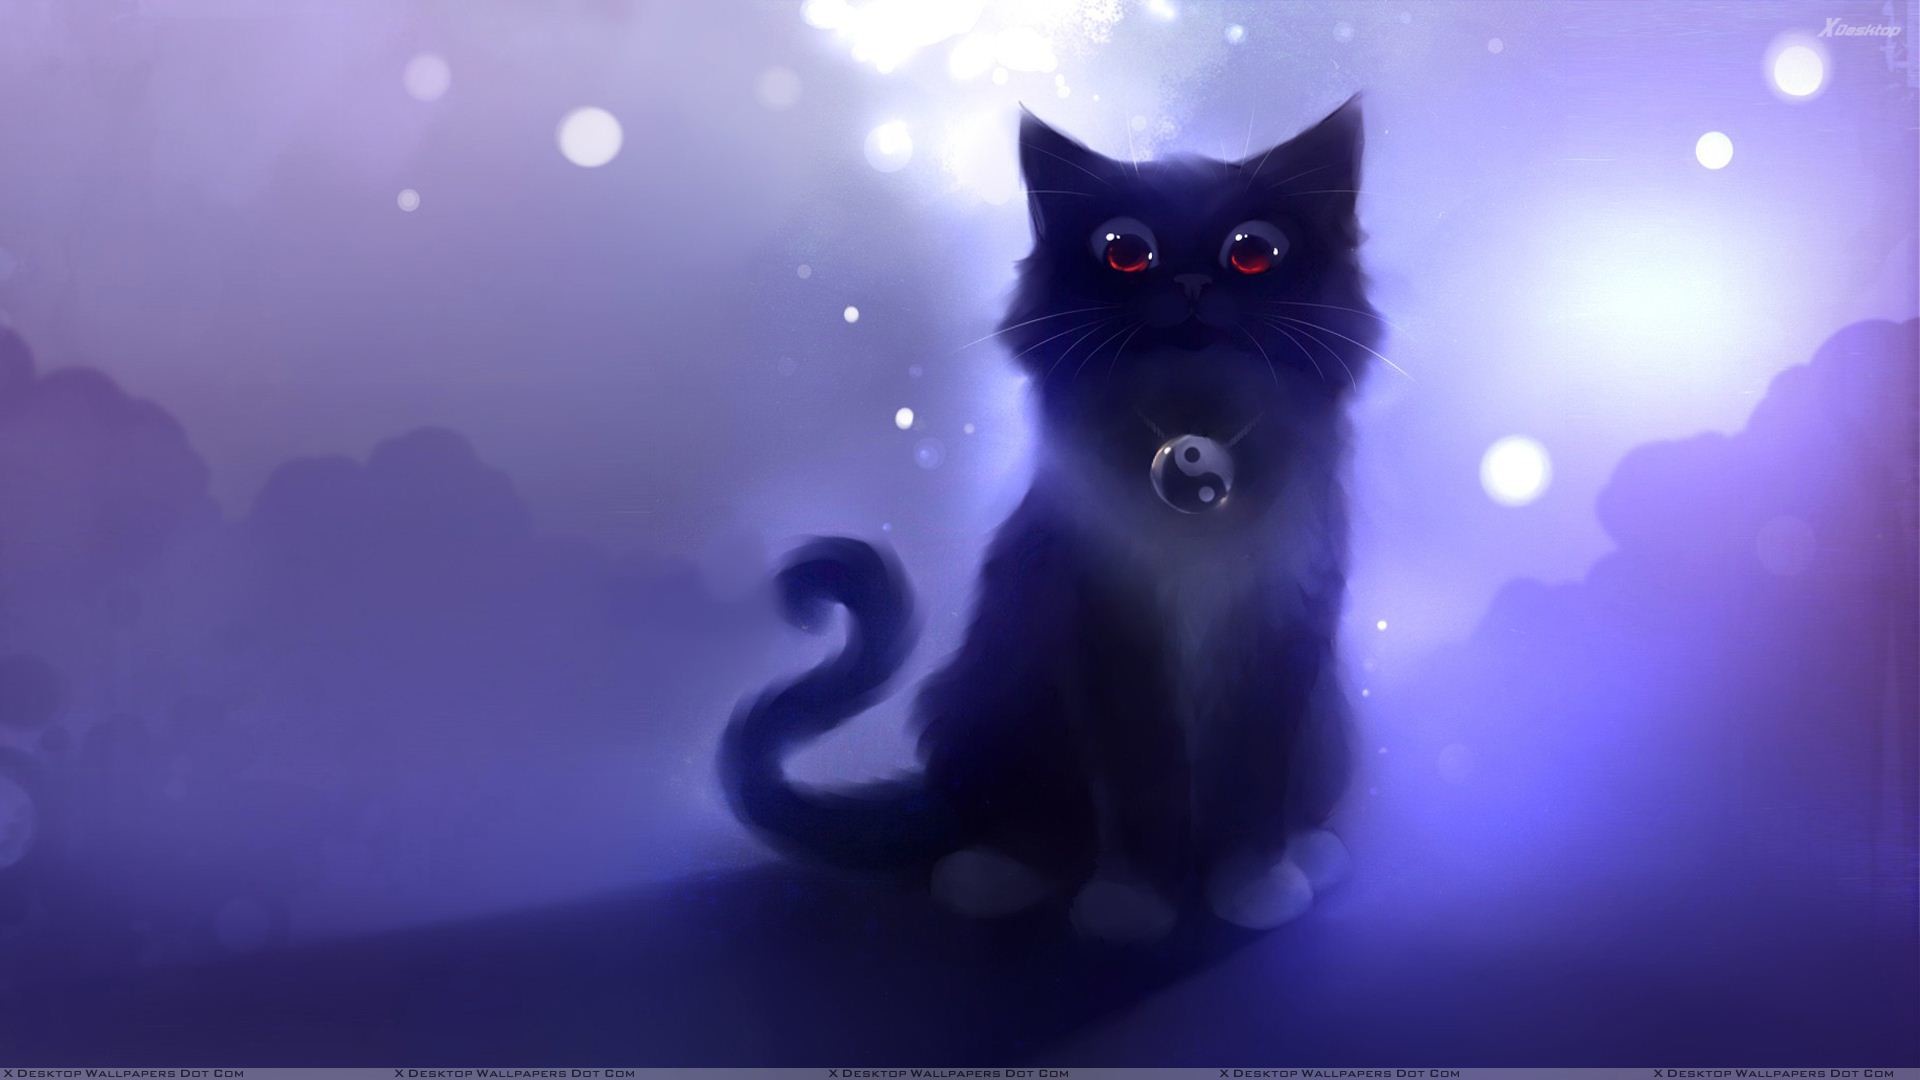 1920x1080 You are viewing wallpaper titled "Cartoon Black Cat ...